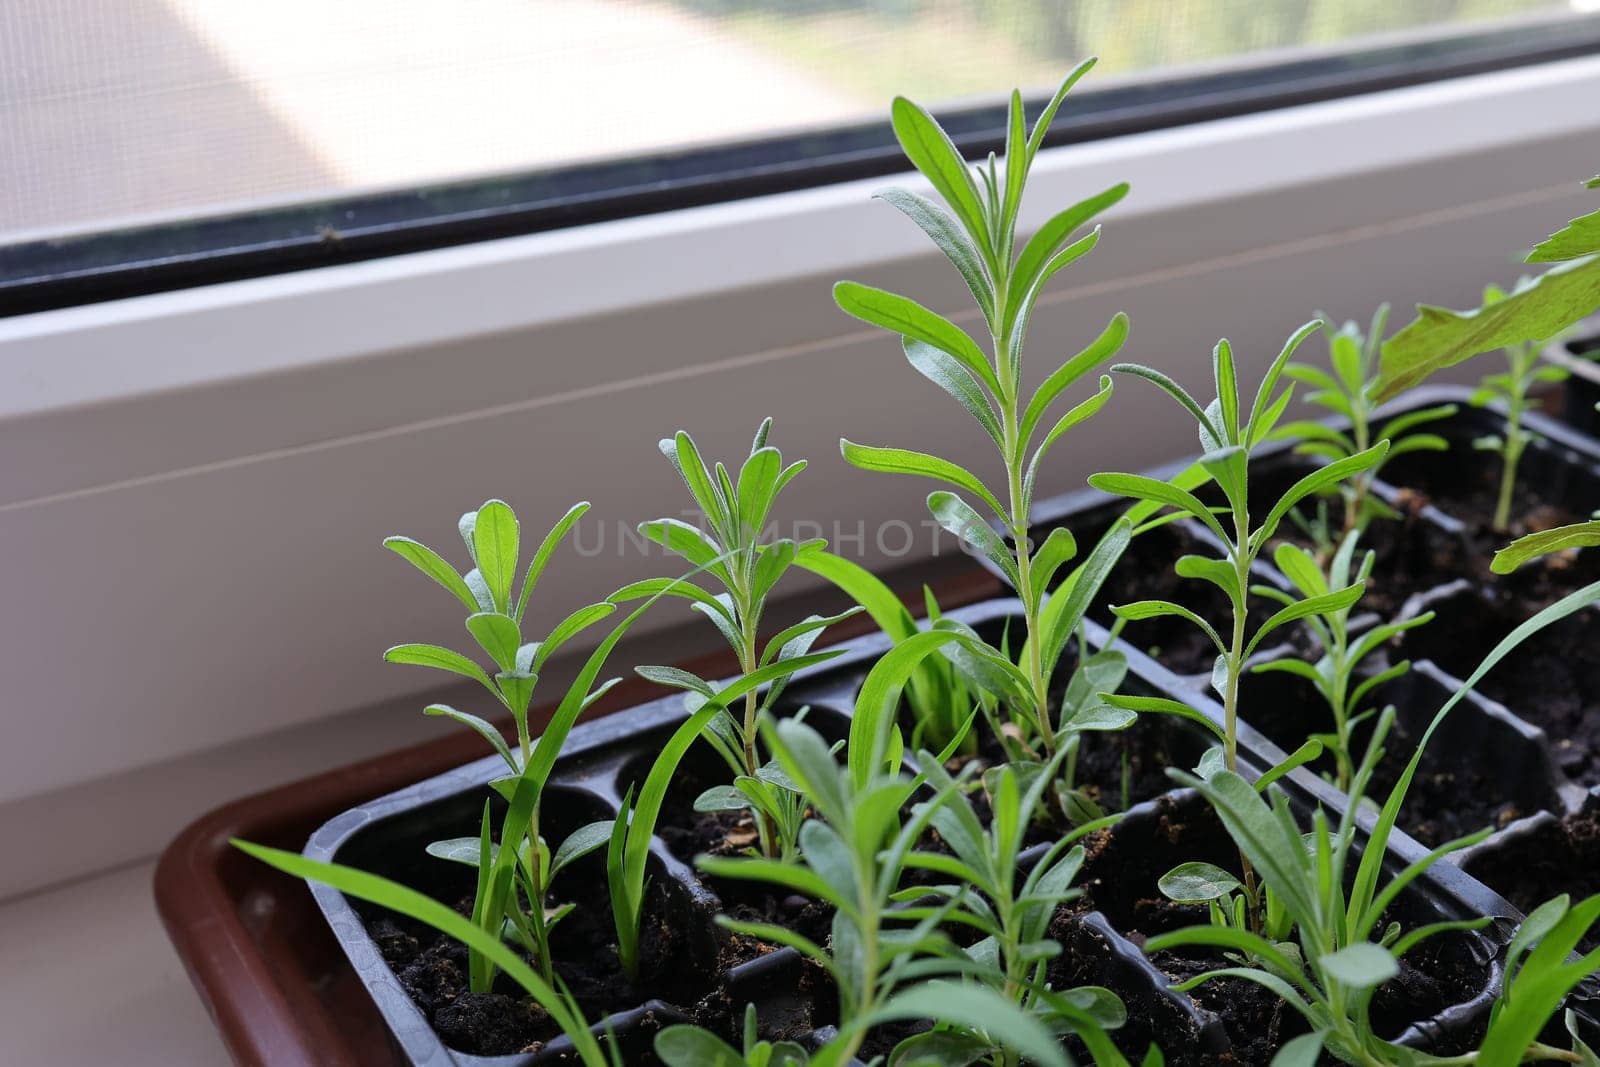 Lavender seedlings grown at home from seeds are planted in special containers on the windowsill. Gardening and vegetable gardening concept